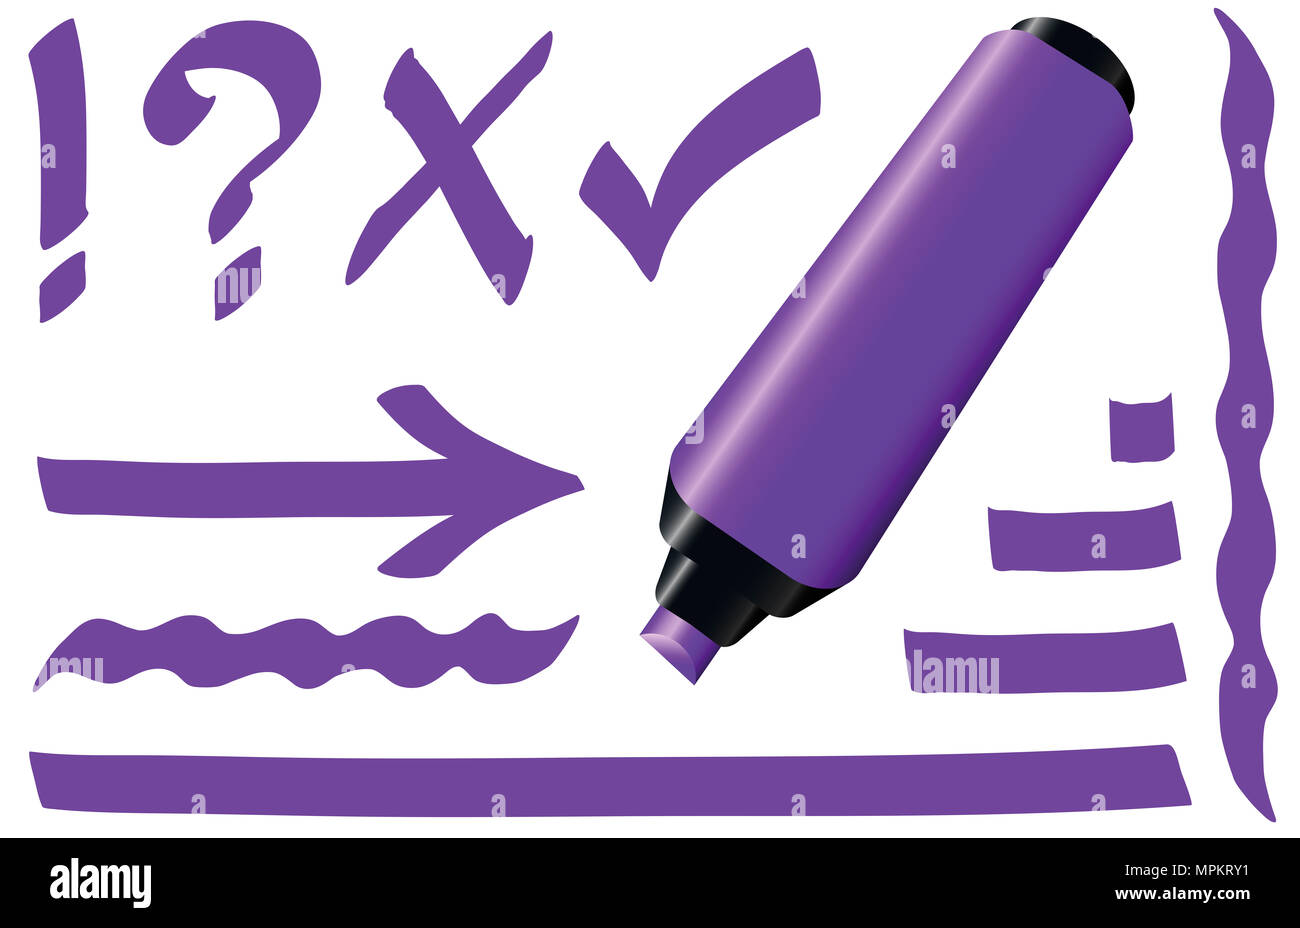 Purple fluorescent marker pen. Bright violet highlighter plus strokes and signs like call sign, question mark, tick mark and arrow. Stock Photo